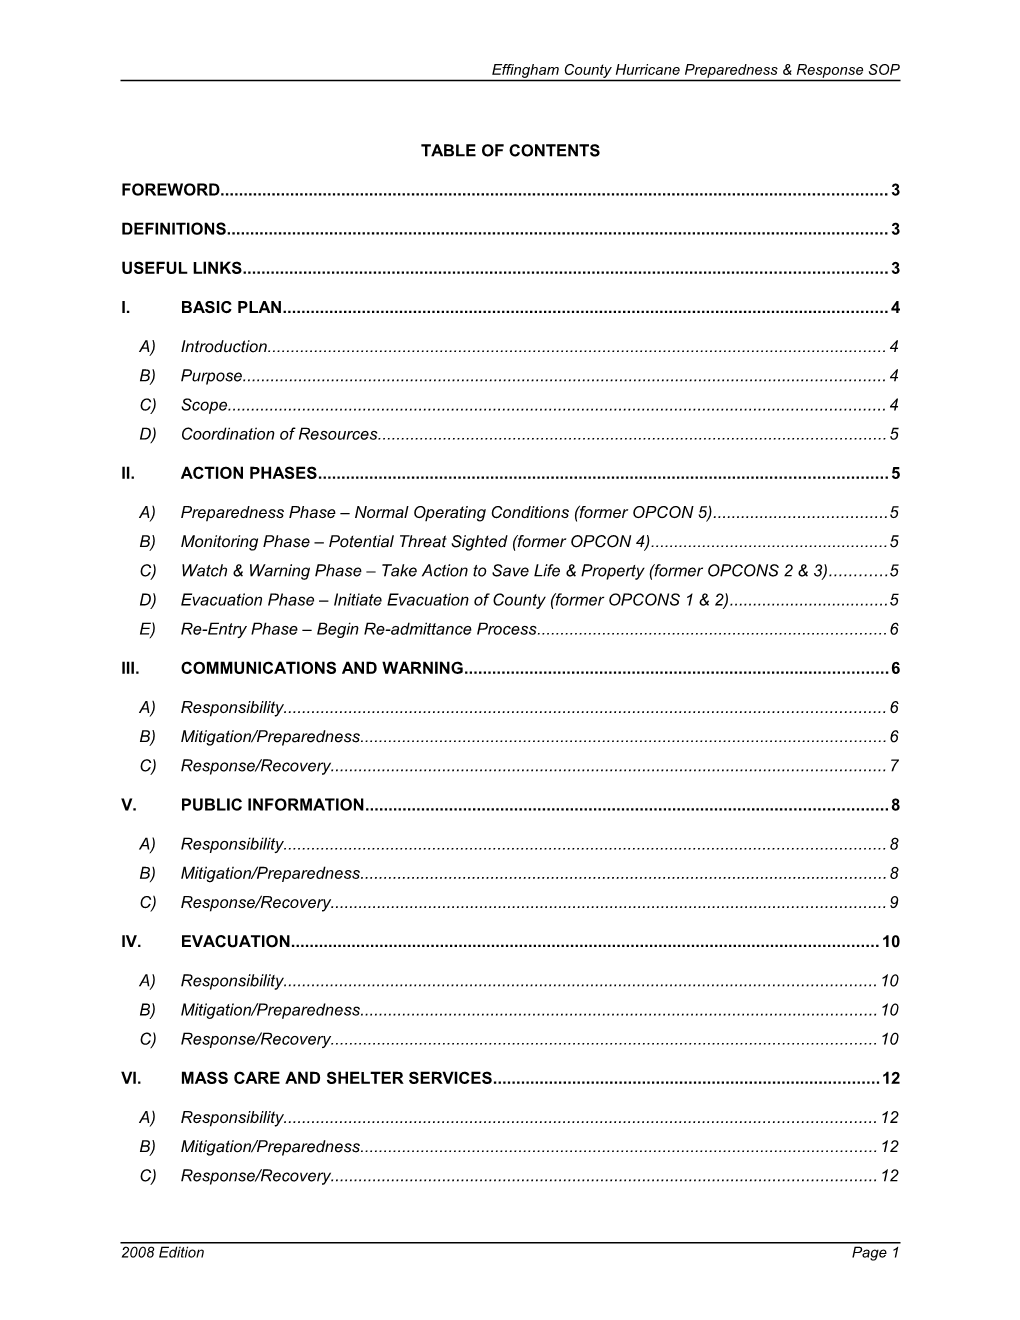 Table of Contents s283